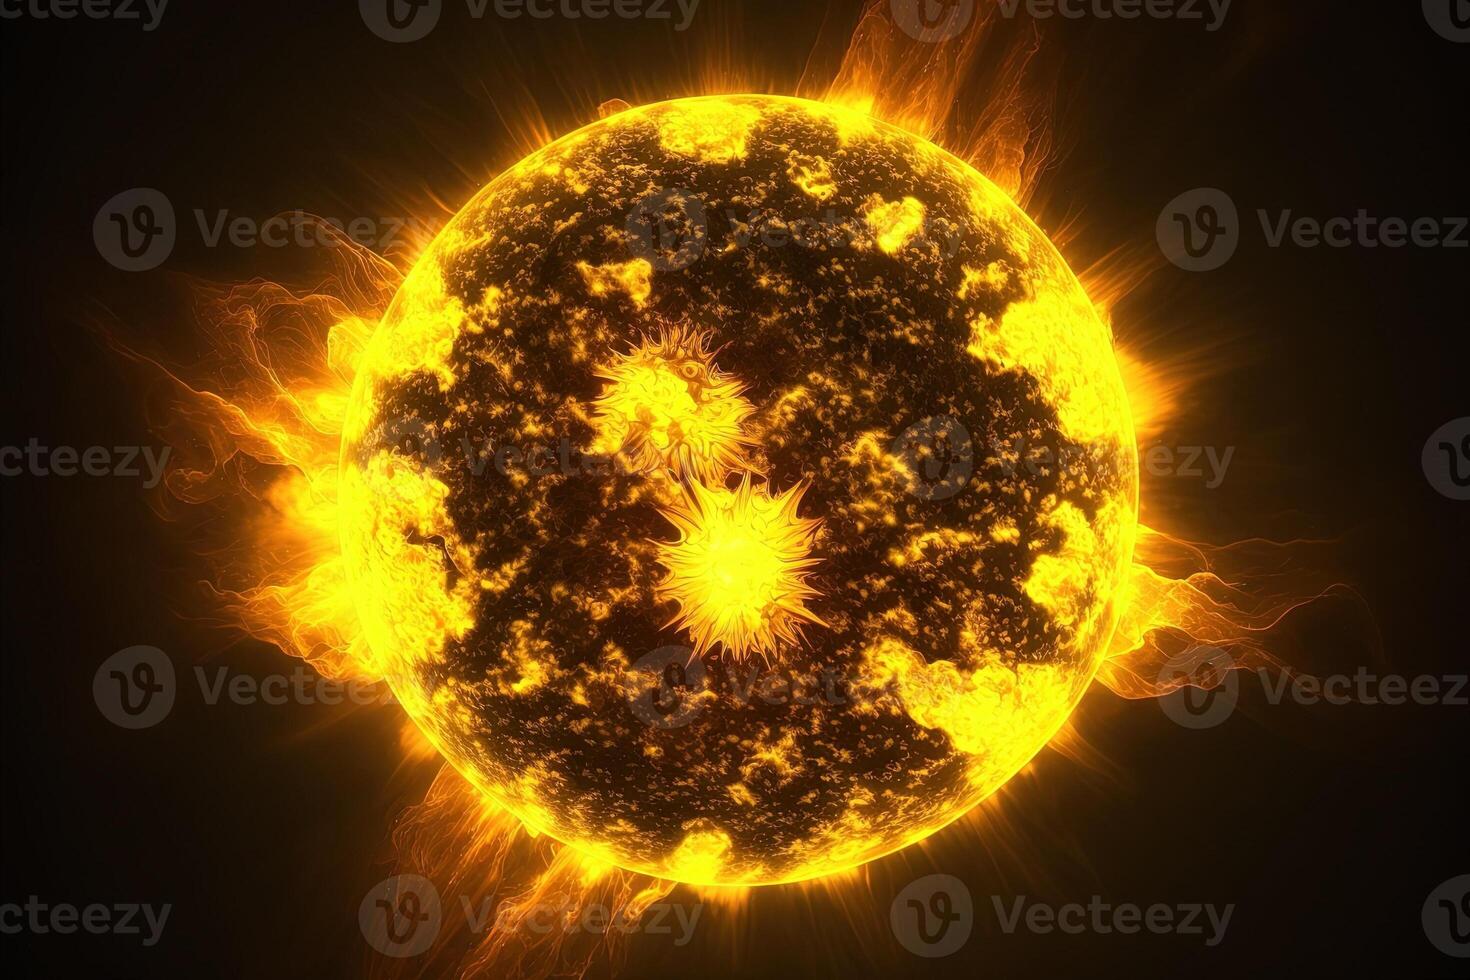 ultra close up detail image of the sun illustration photo